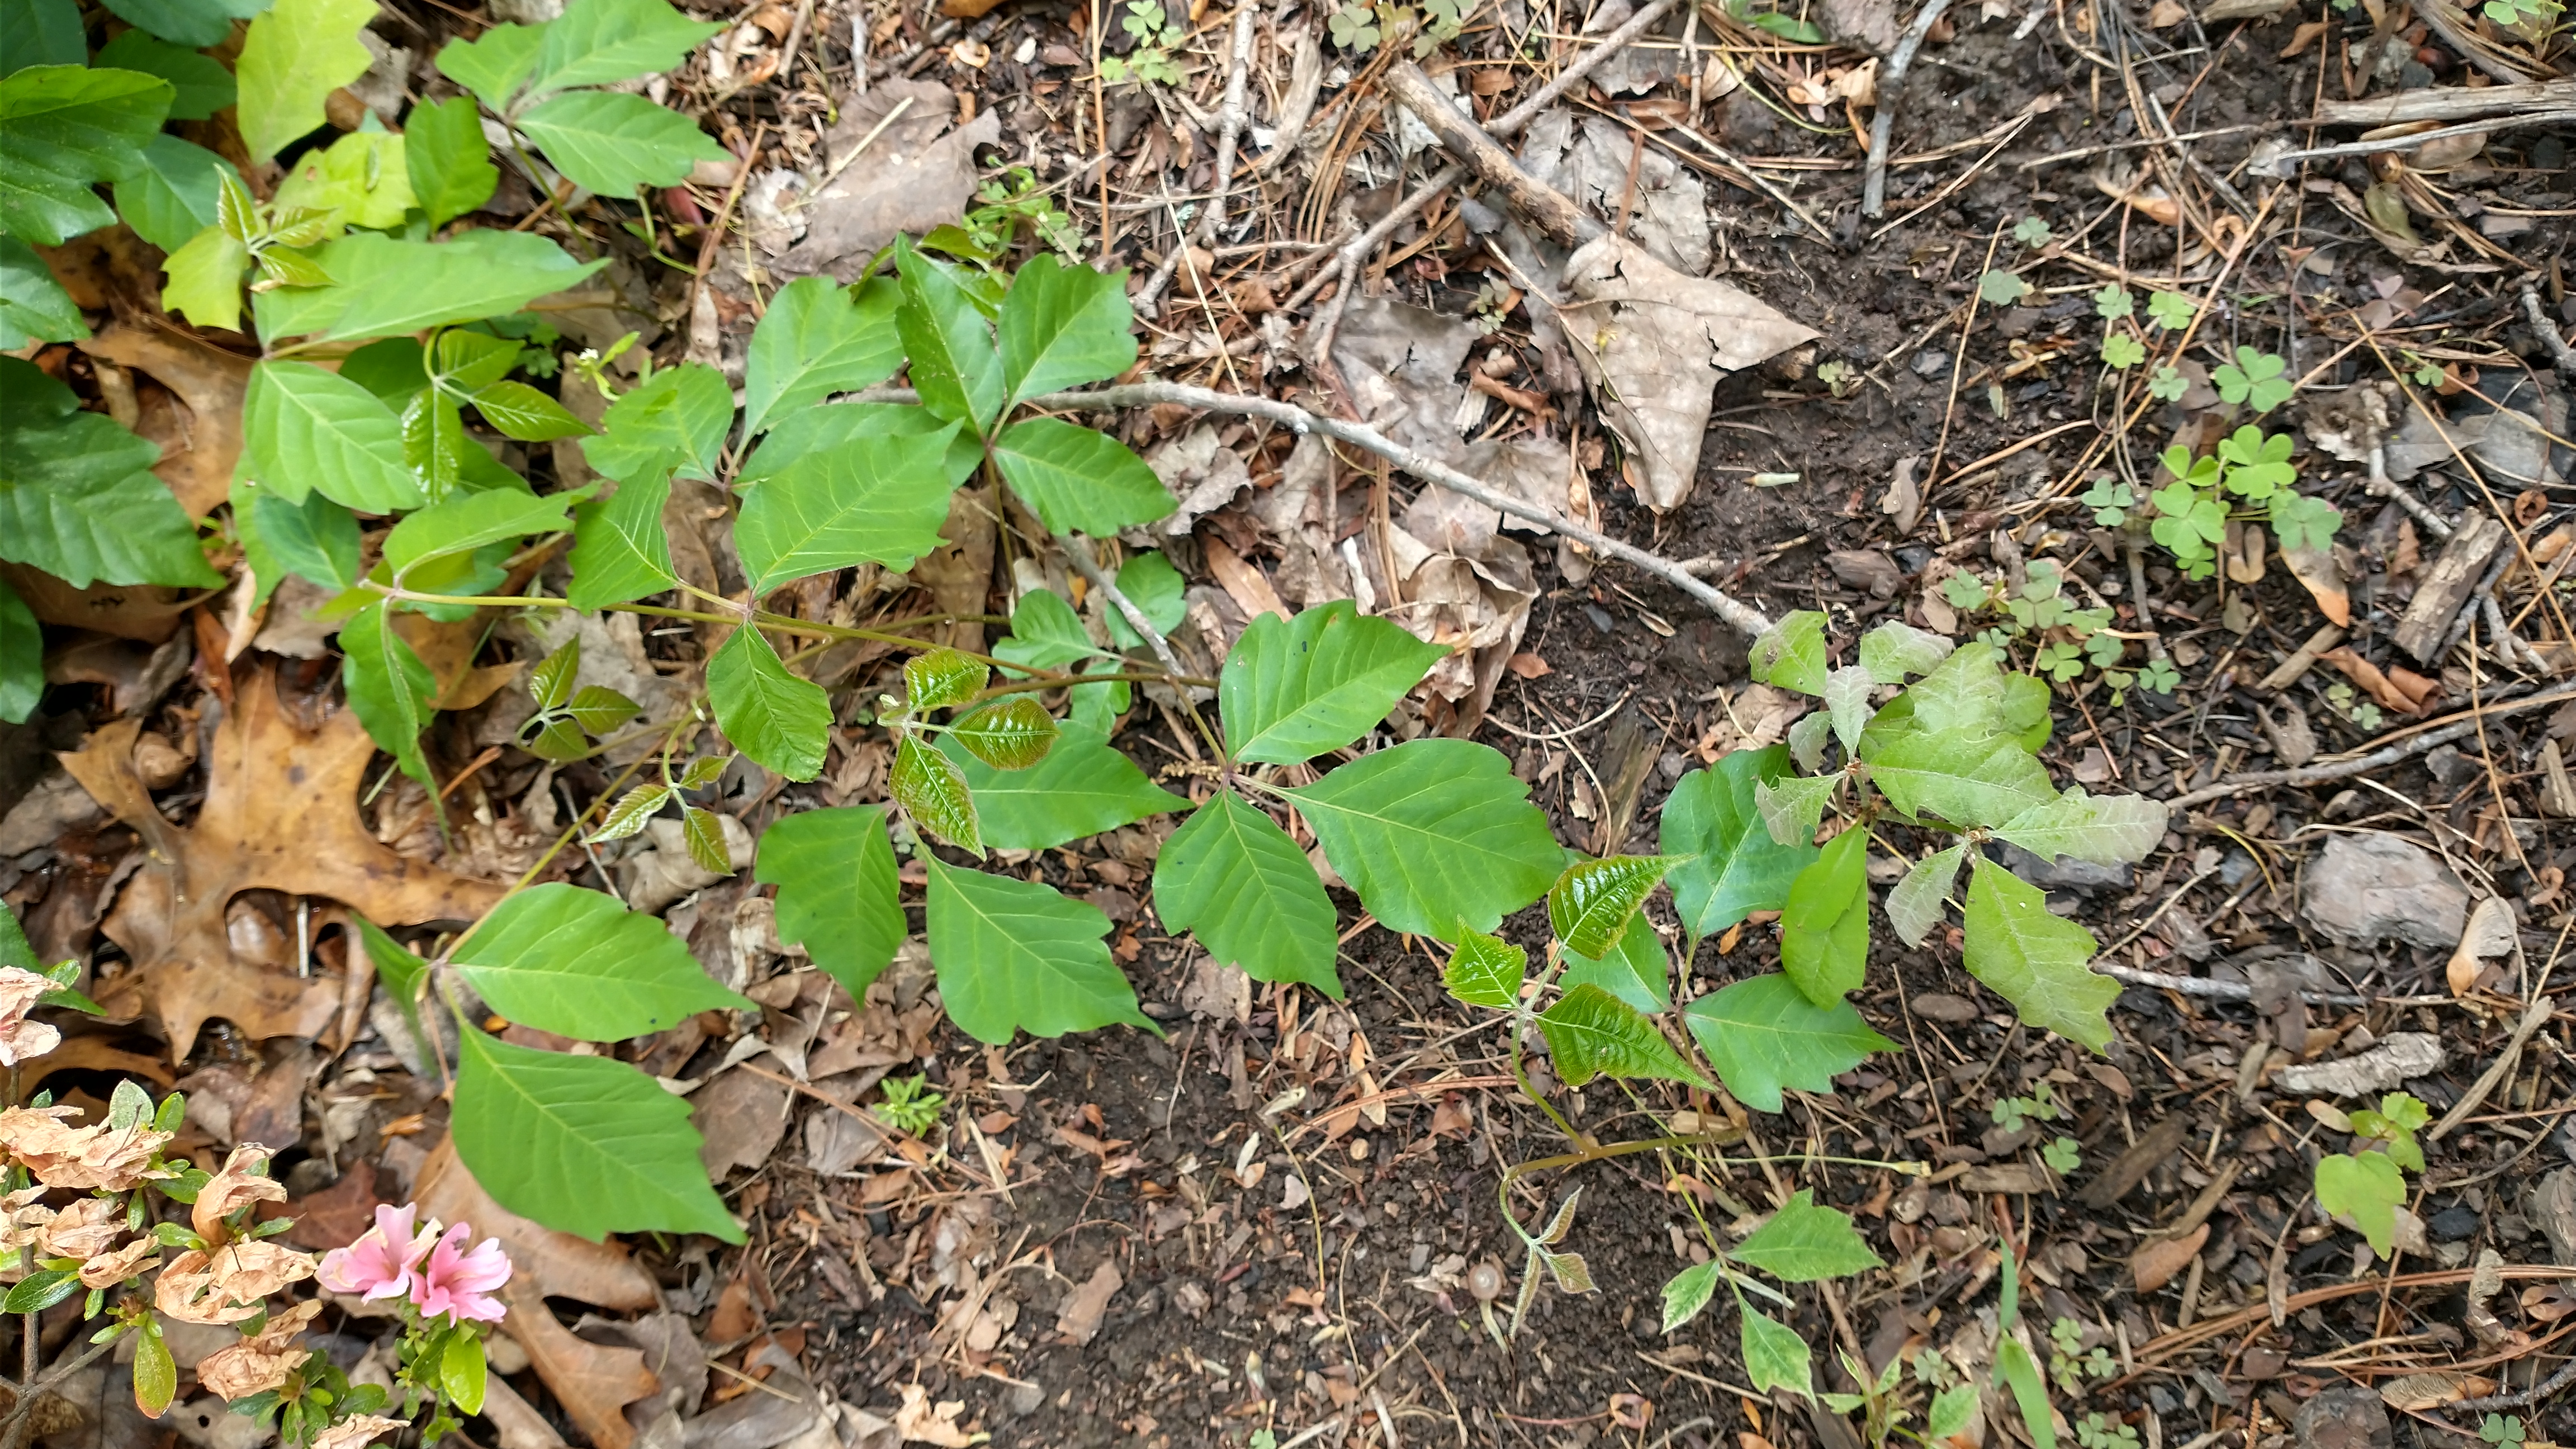 Poison ivy can be controlled now with a brushkiller herbicide. (Credit Seth Nagy)